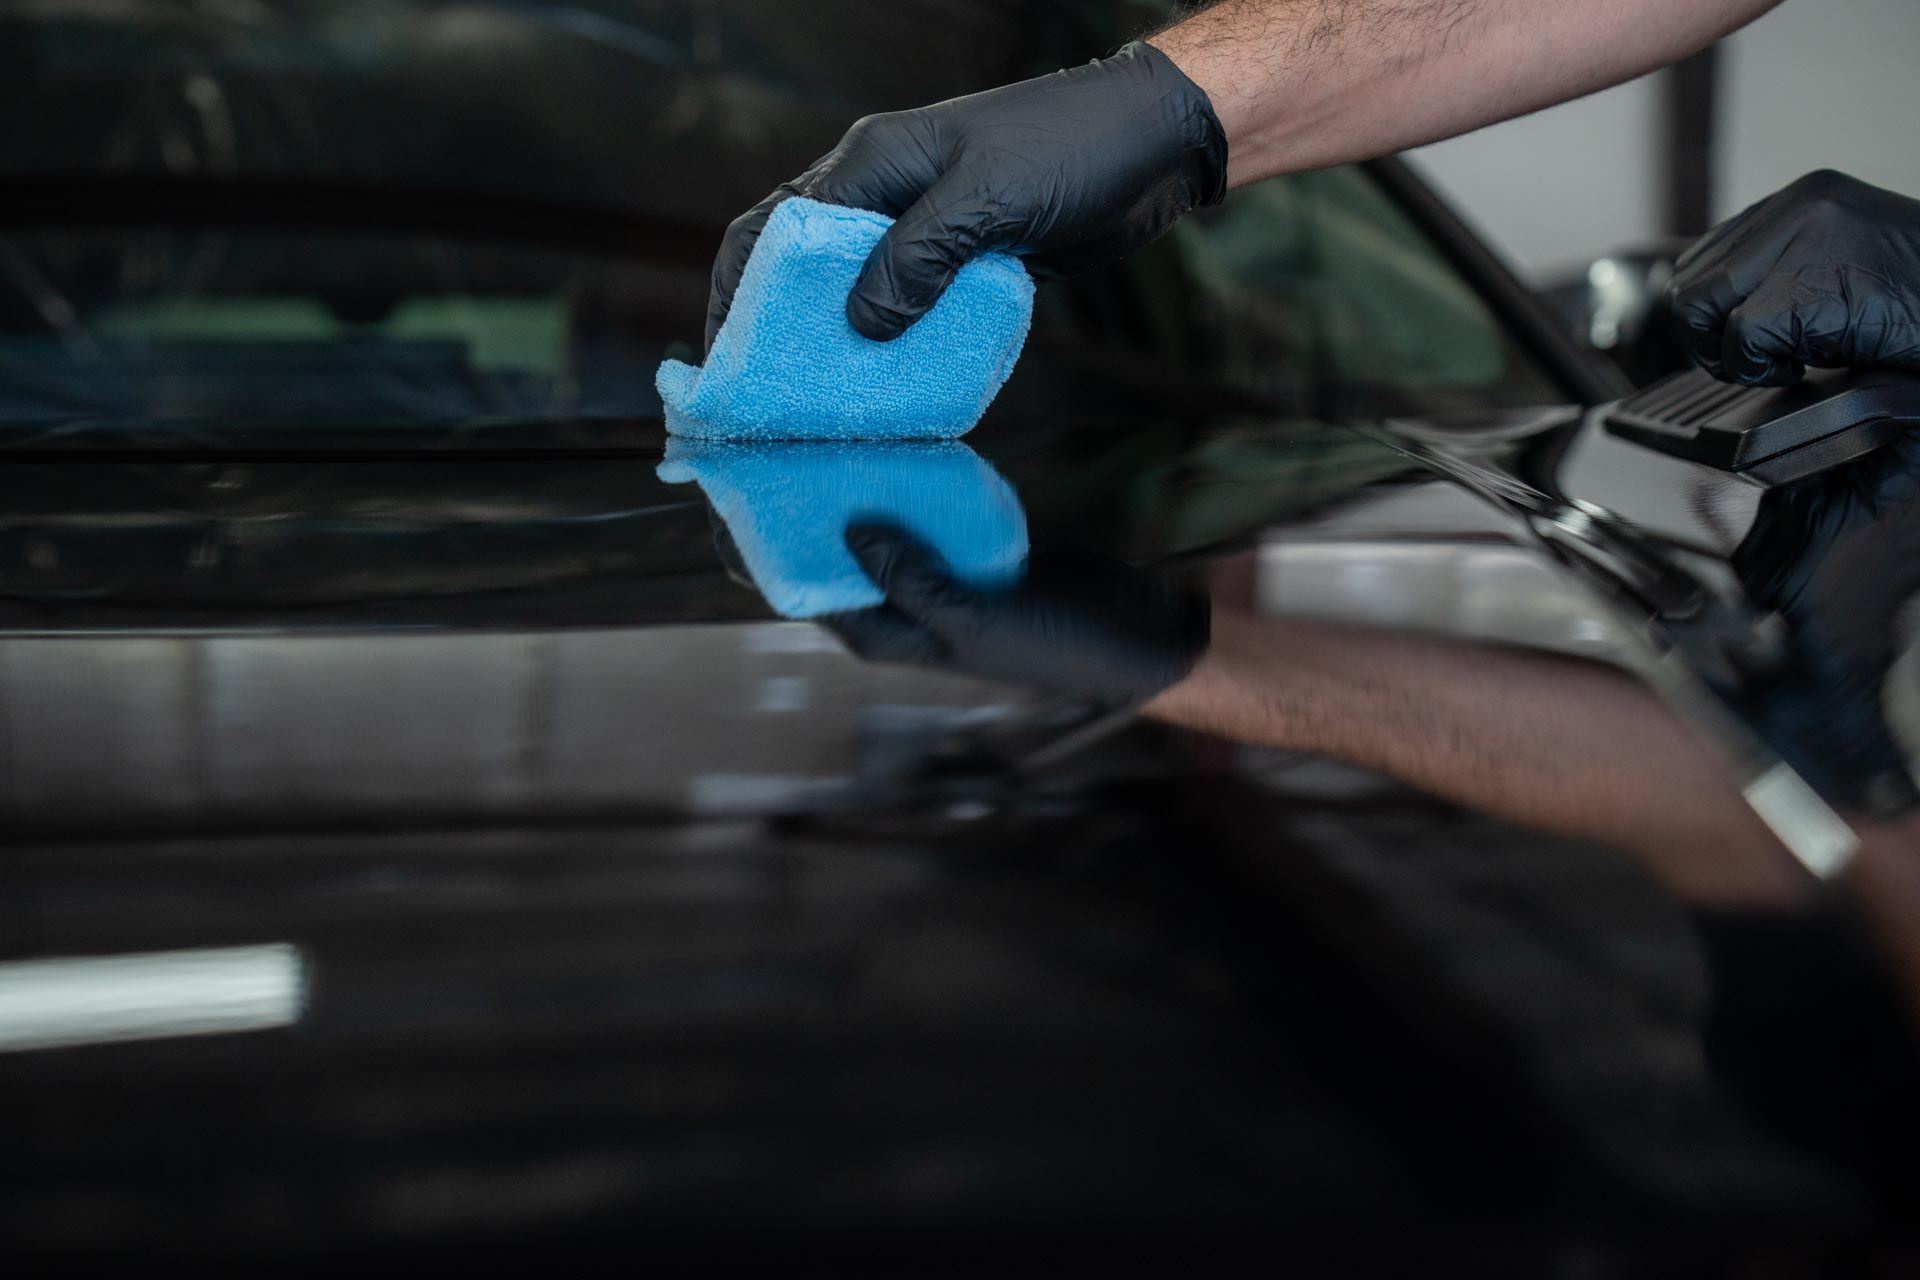 a person wearing black gloves is cleaning a car with a blue sponge